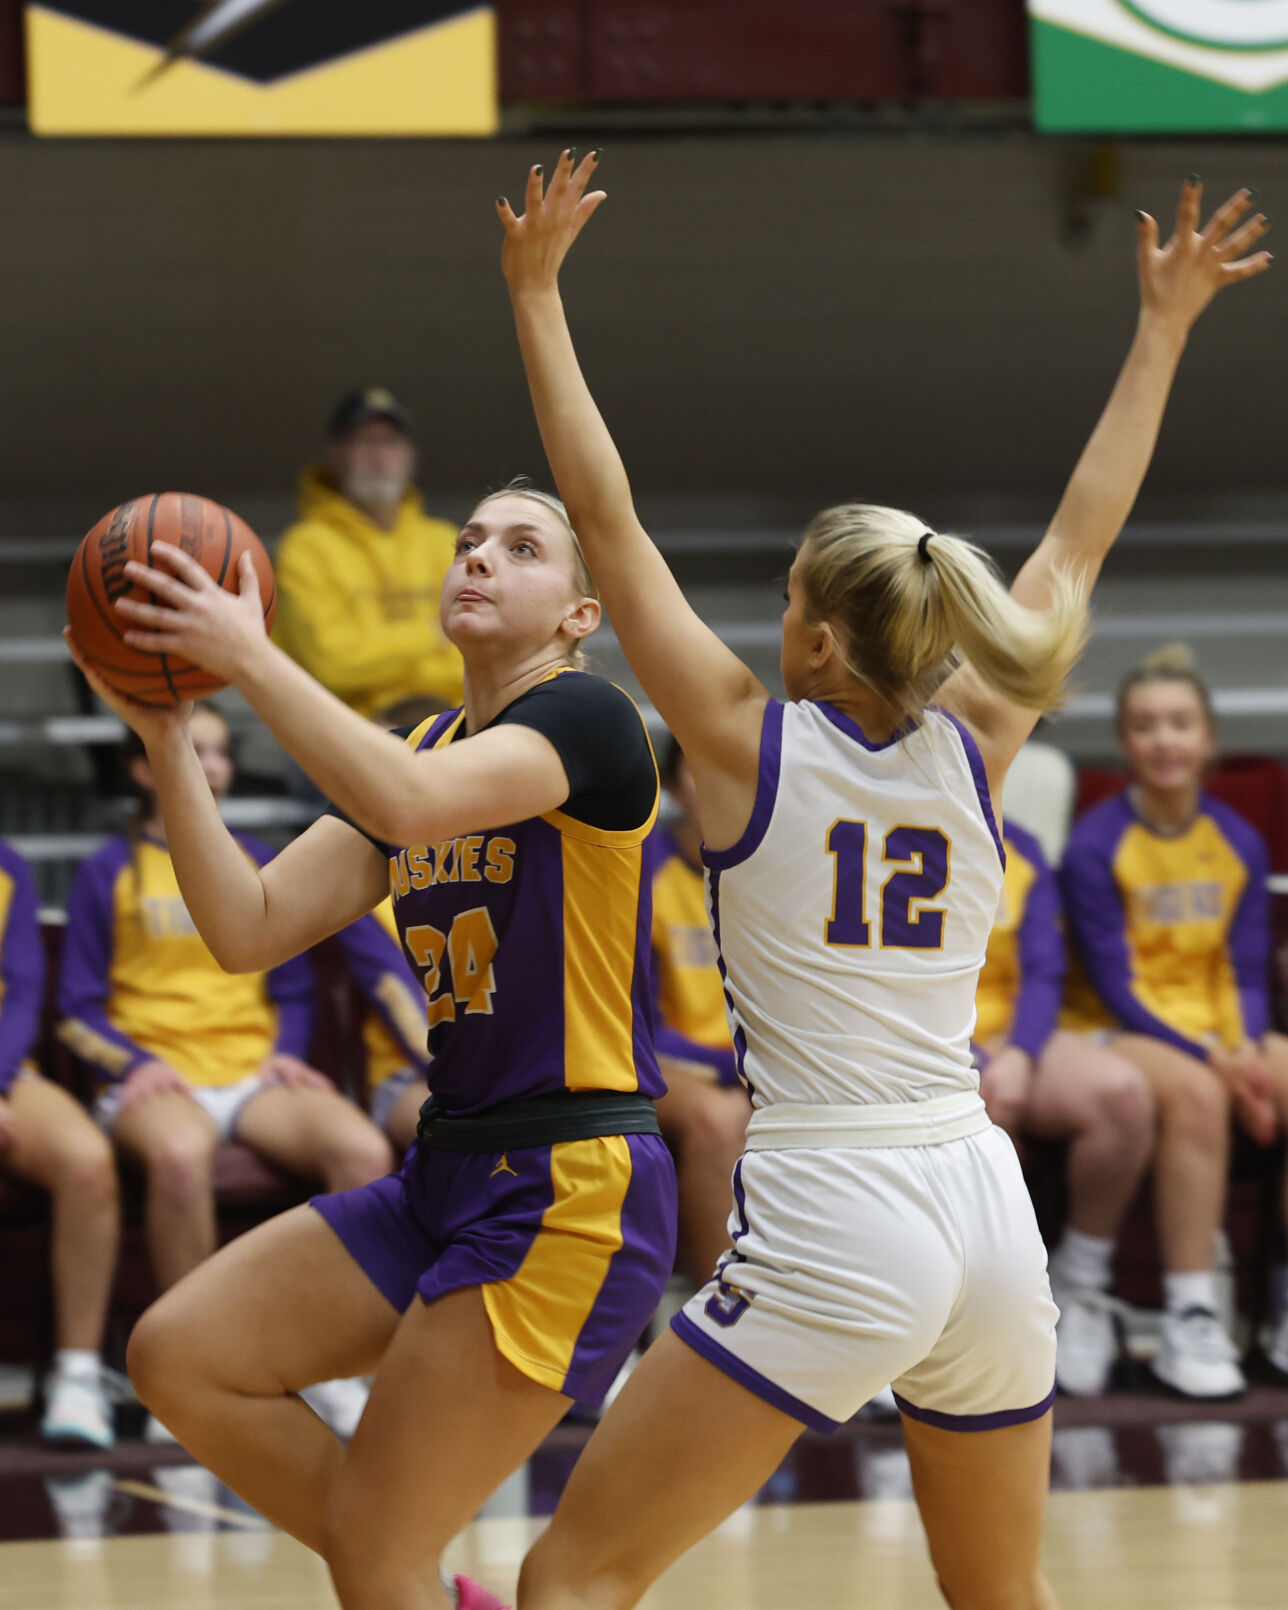 Annie Zillig Dominates as Muscatine Muskies Defeat Sherrard Tigers 64-44